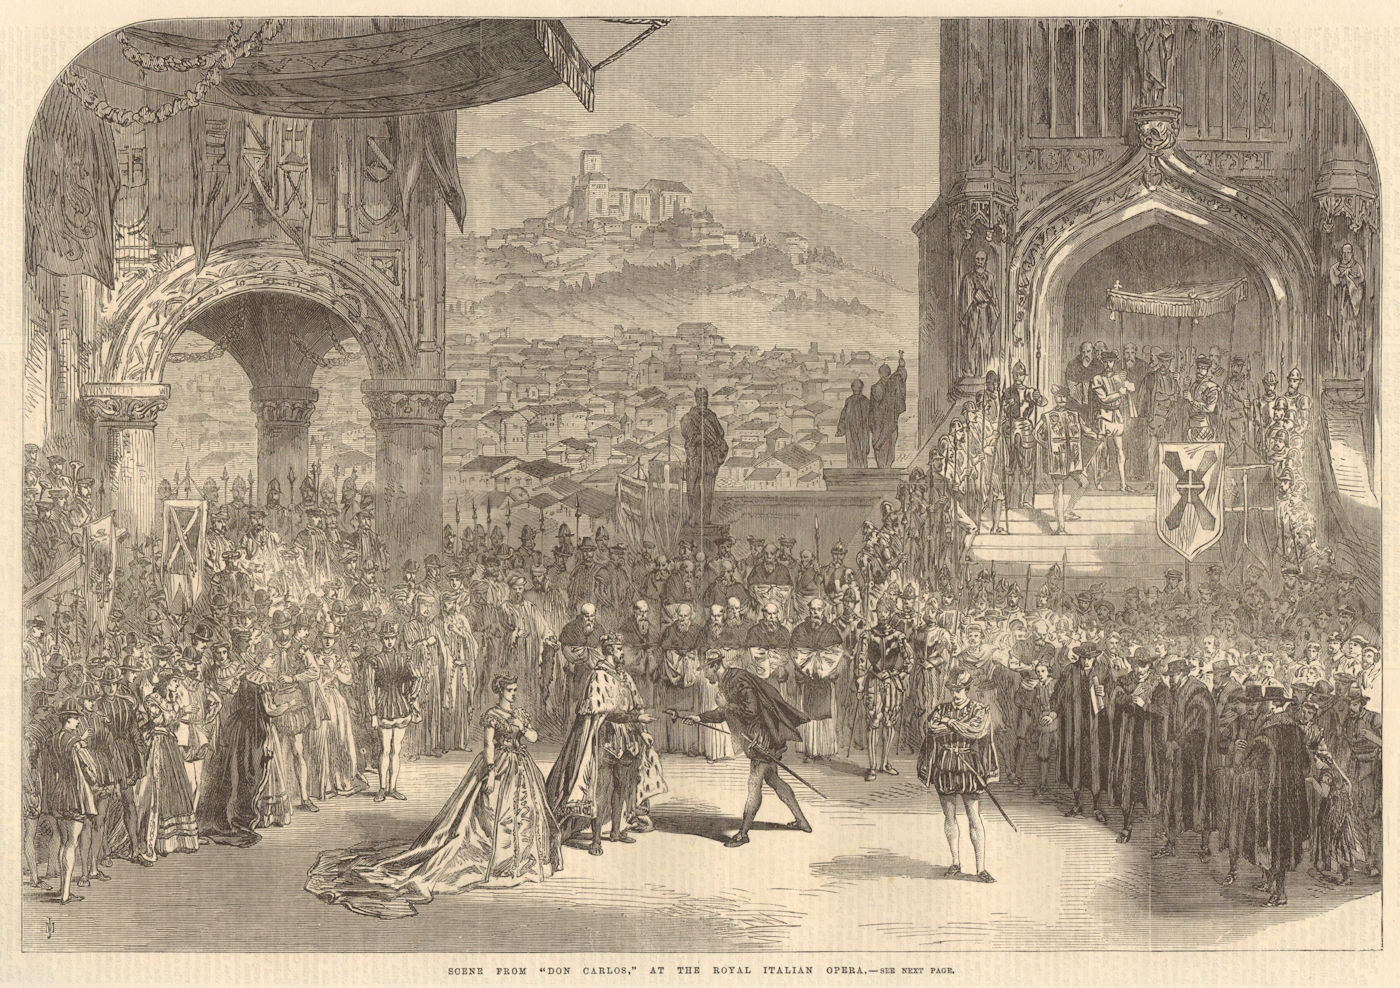 Associate Product Scene from "Don Carlos" at the Royal Italian Opera. Performing Arts 1867